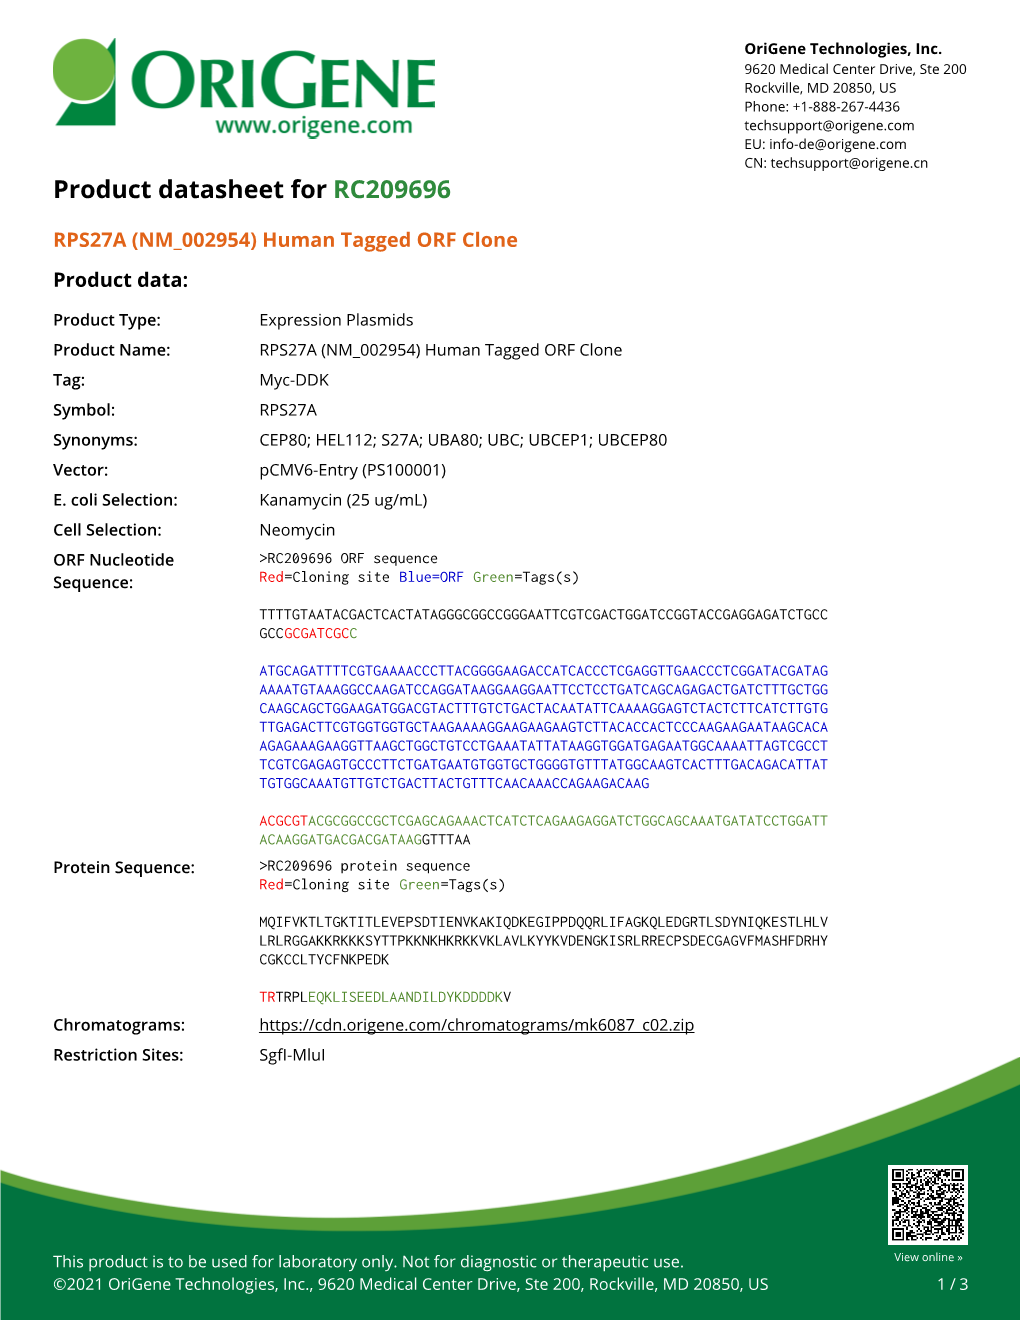 RPS27A (NM 002954) Human Tagged ORF Clone Product Data